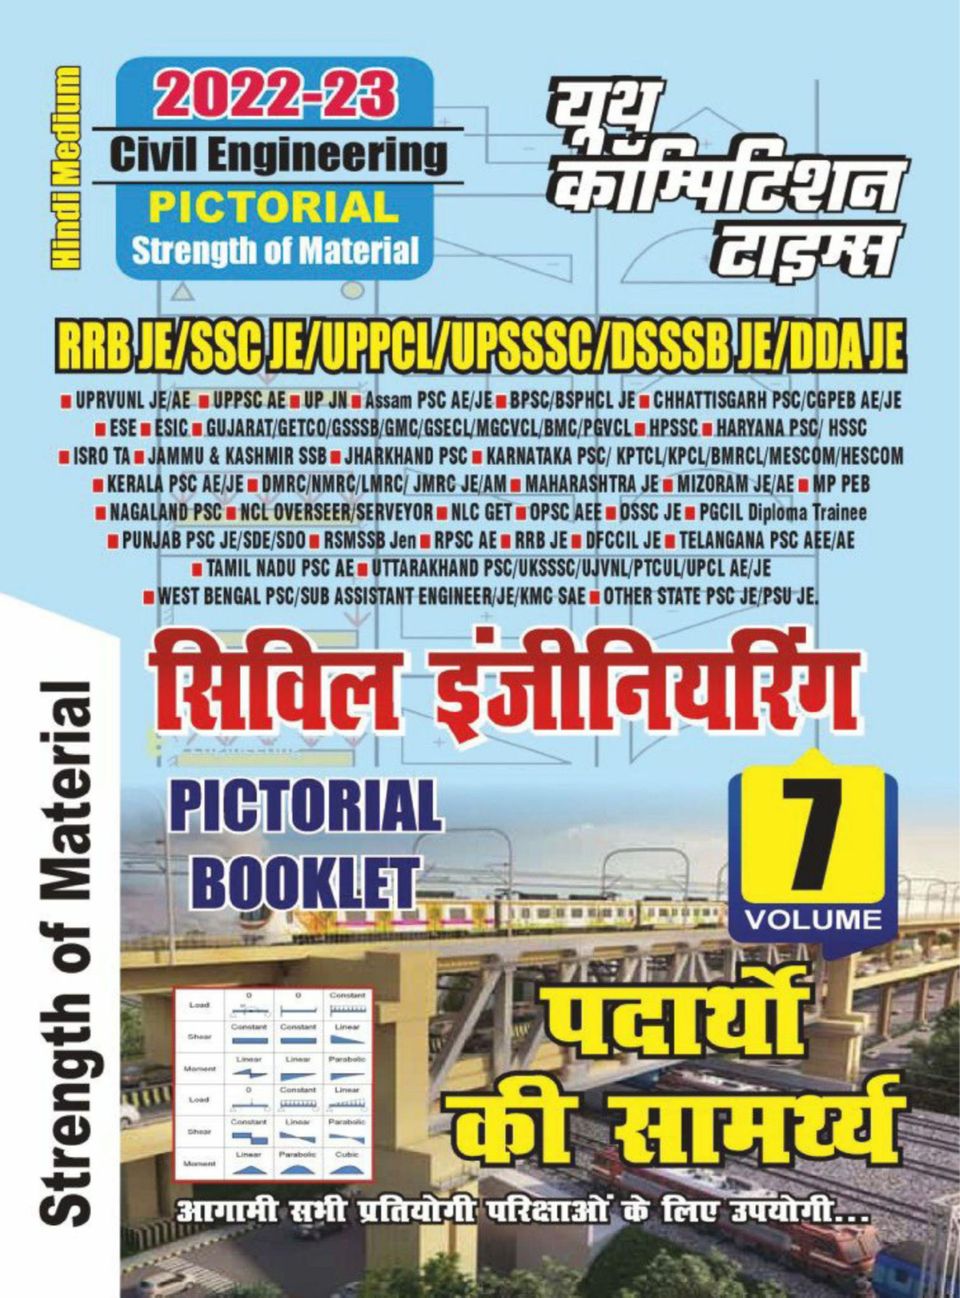 933754 2023 24 Civil Engineering Je Pictorial Booklet 7 Strength Of Material Cover Hindi Medium Issue 